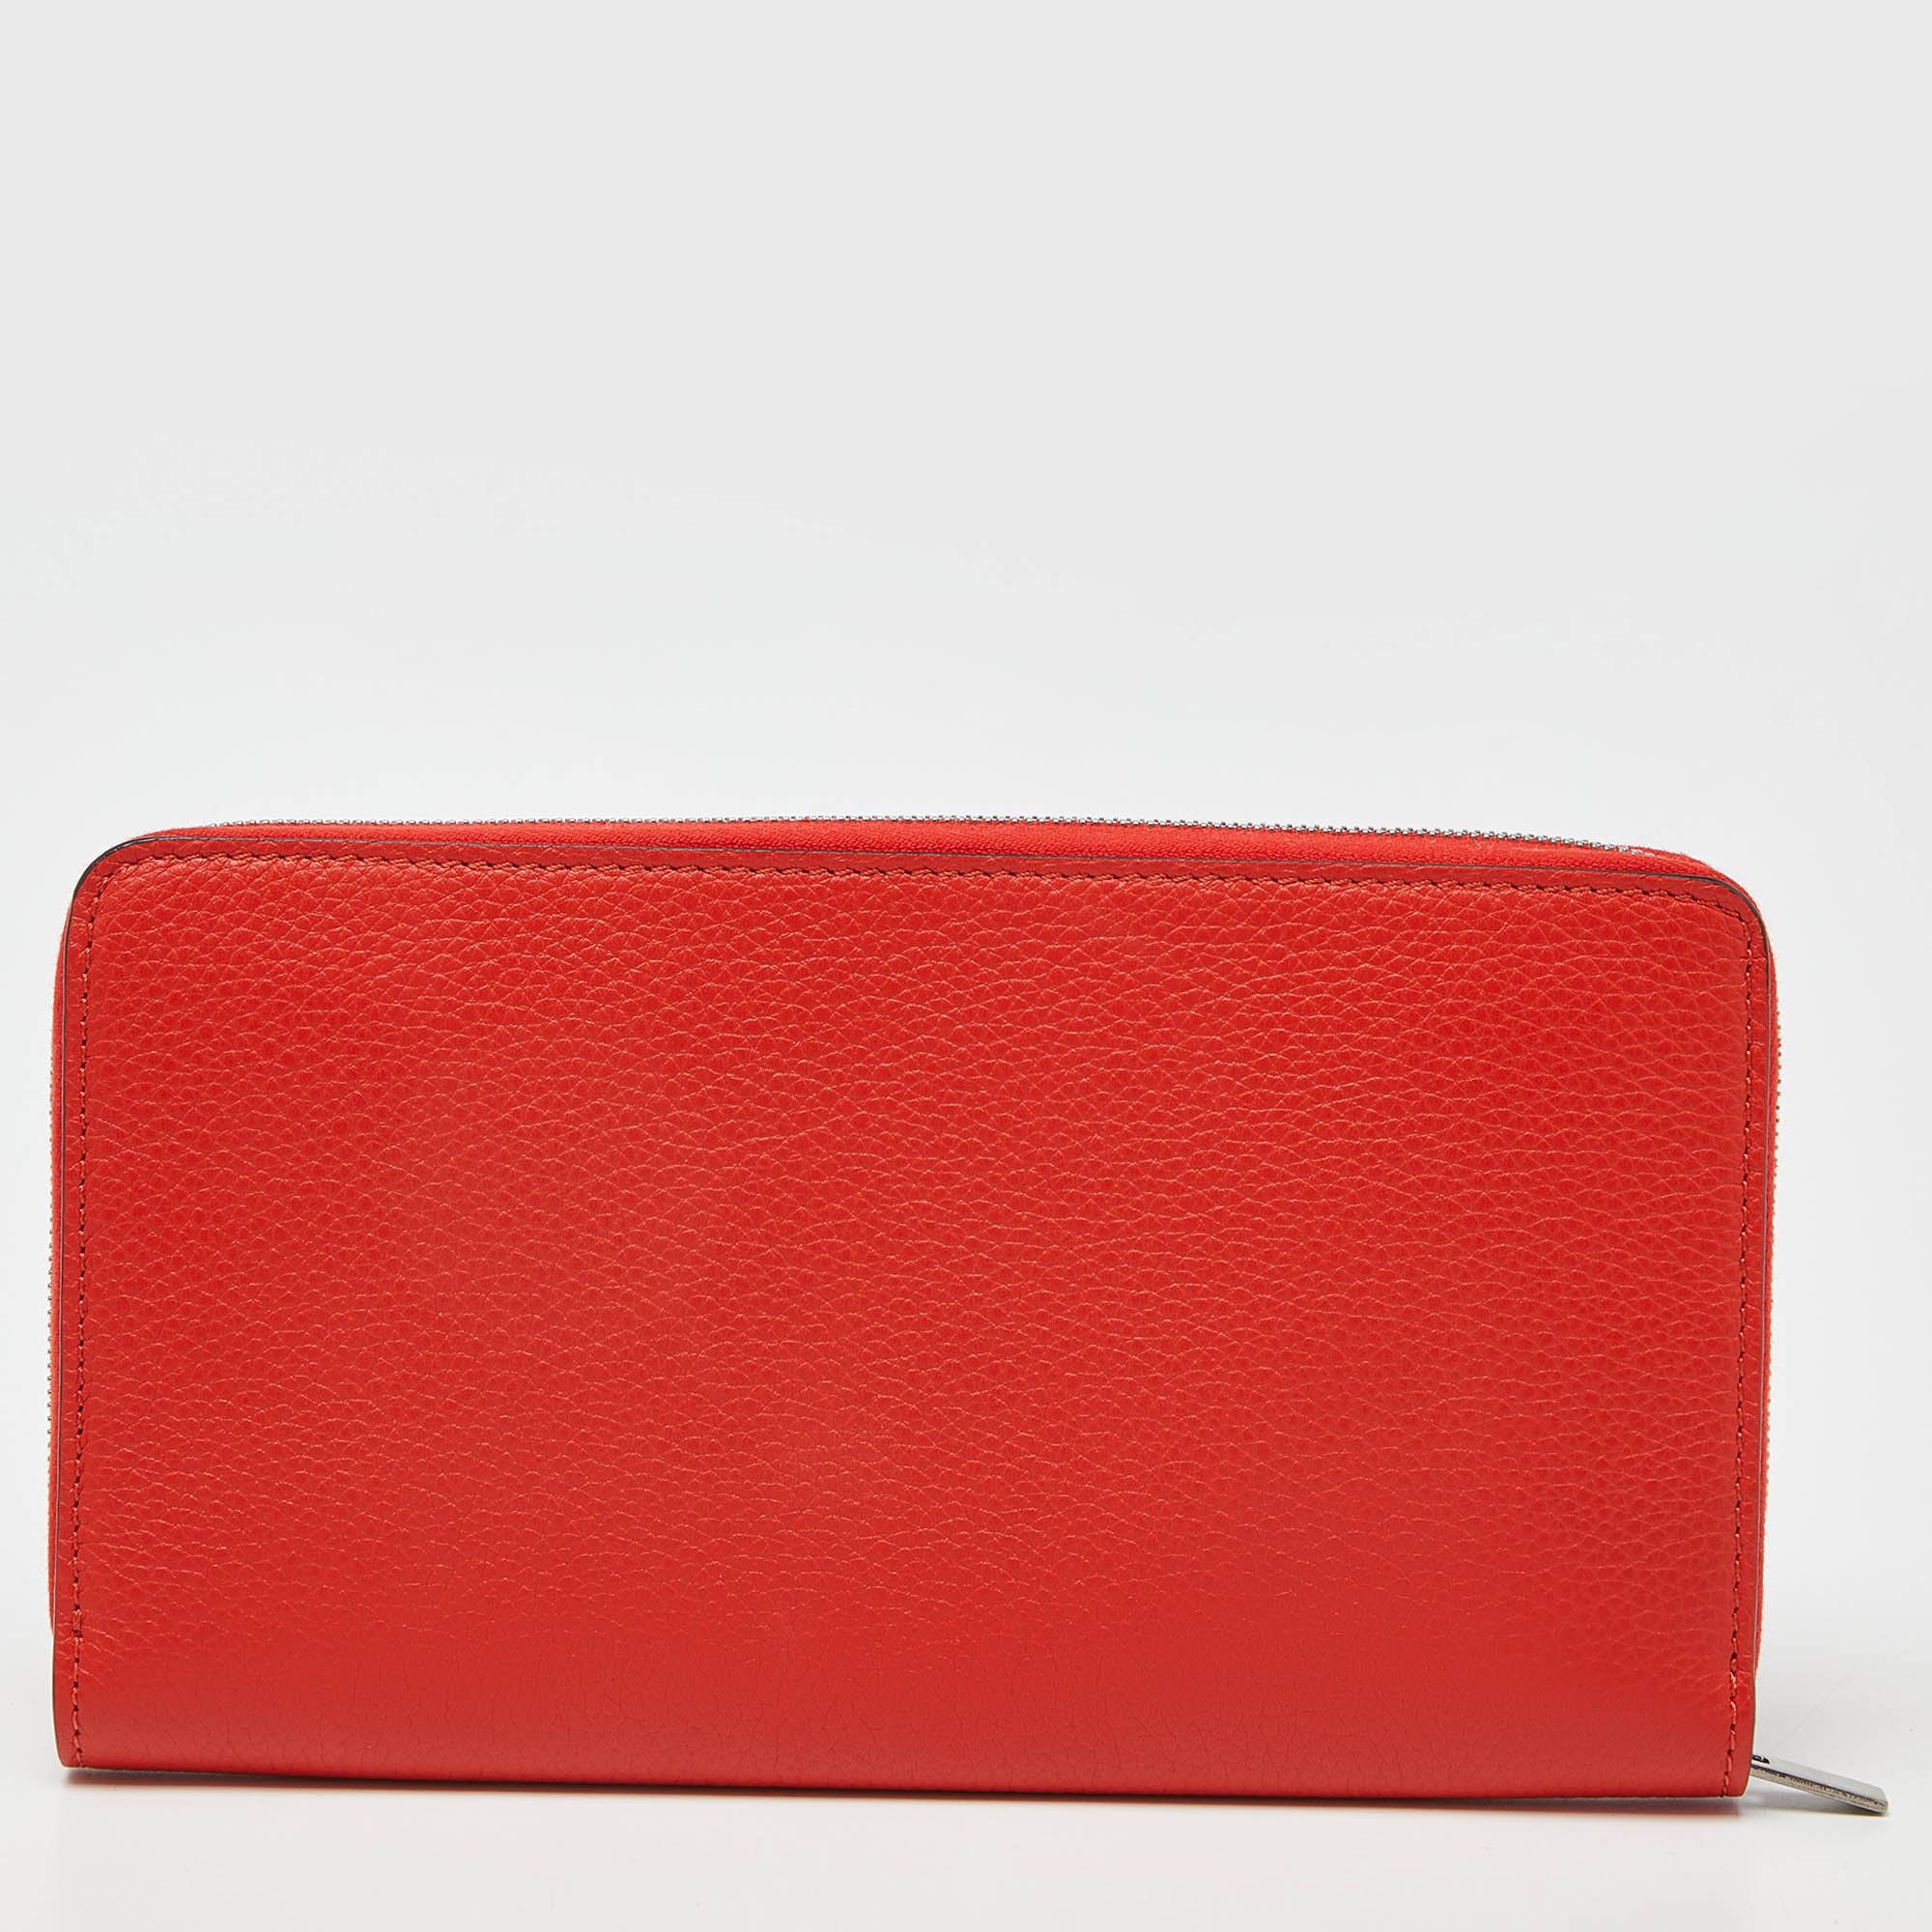 Pre-owned Celine Red Leather Zip Around Wallet